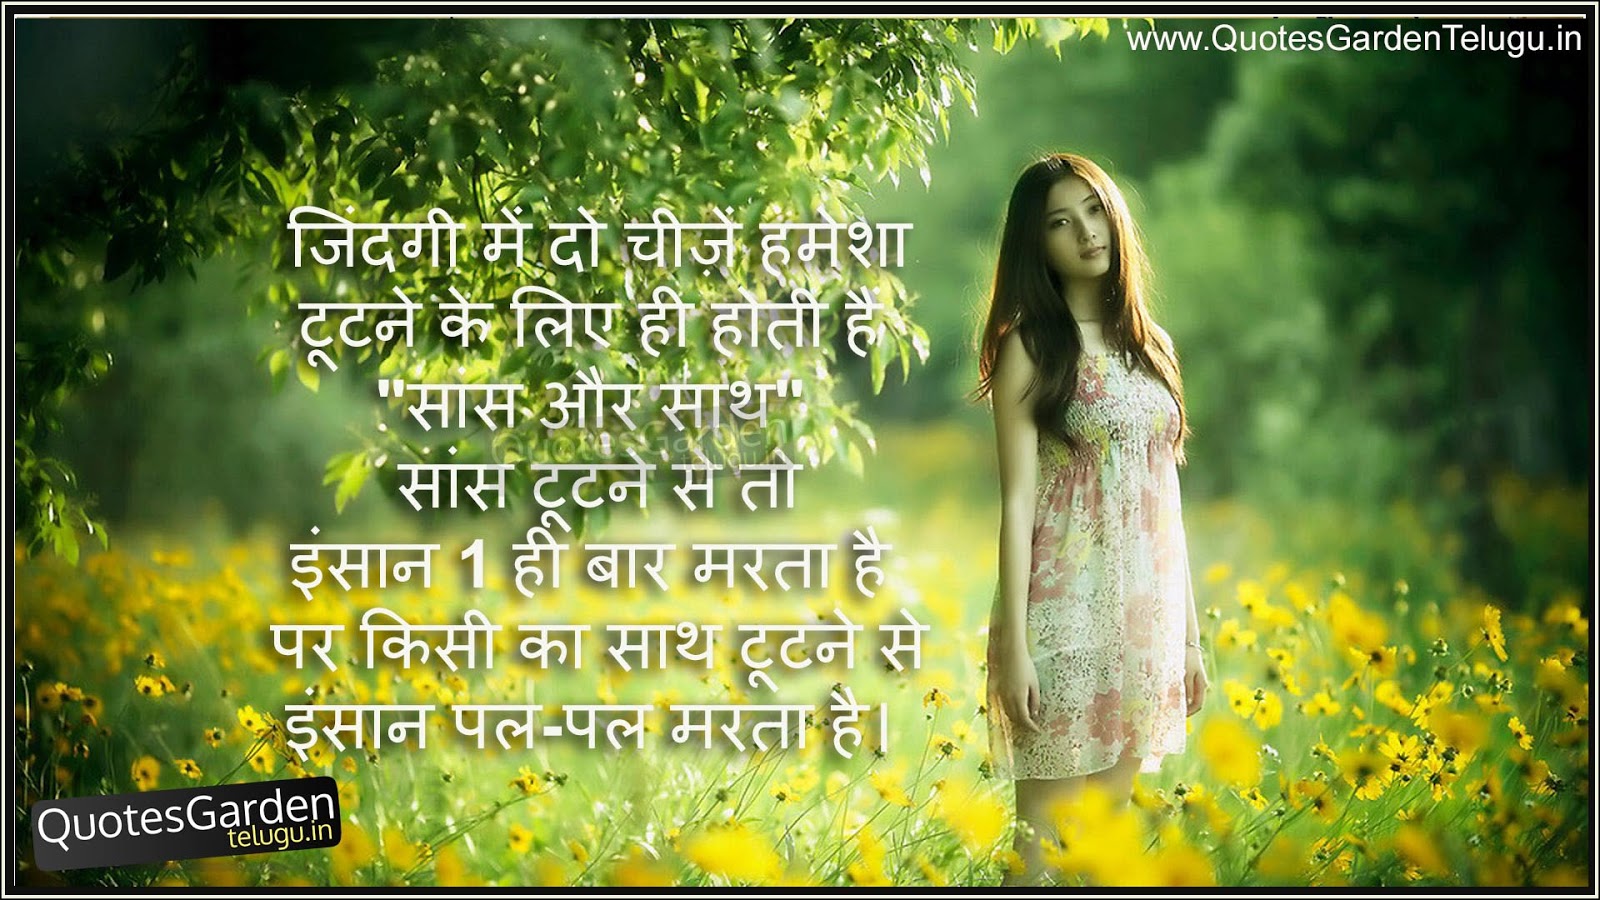 heart touching Hindi Quotes | QUOTES GARDEN TELUGU | Telugu Quotes |  English Quotes | Hindi Quotes |